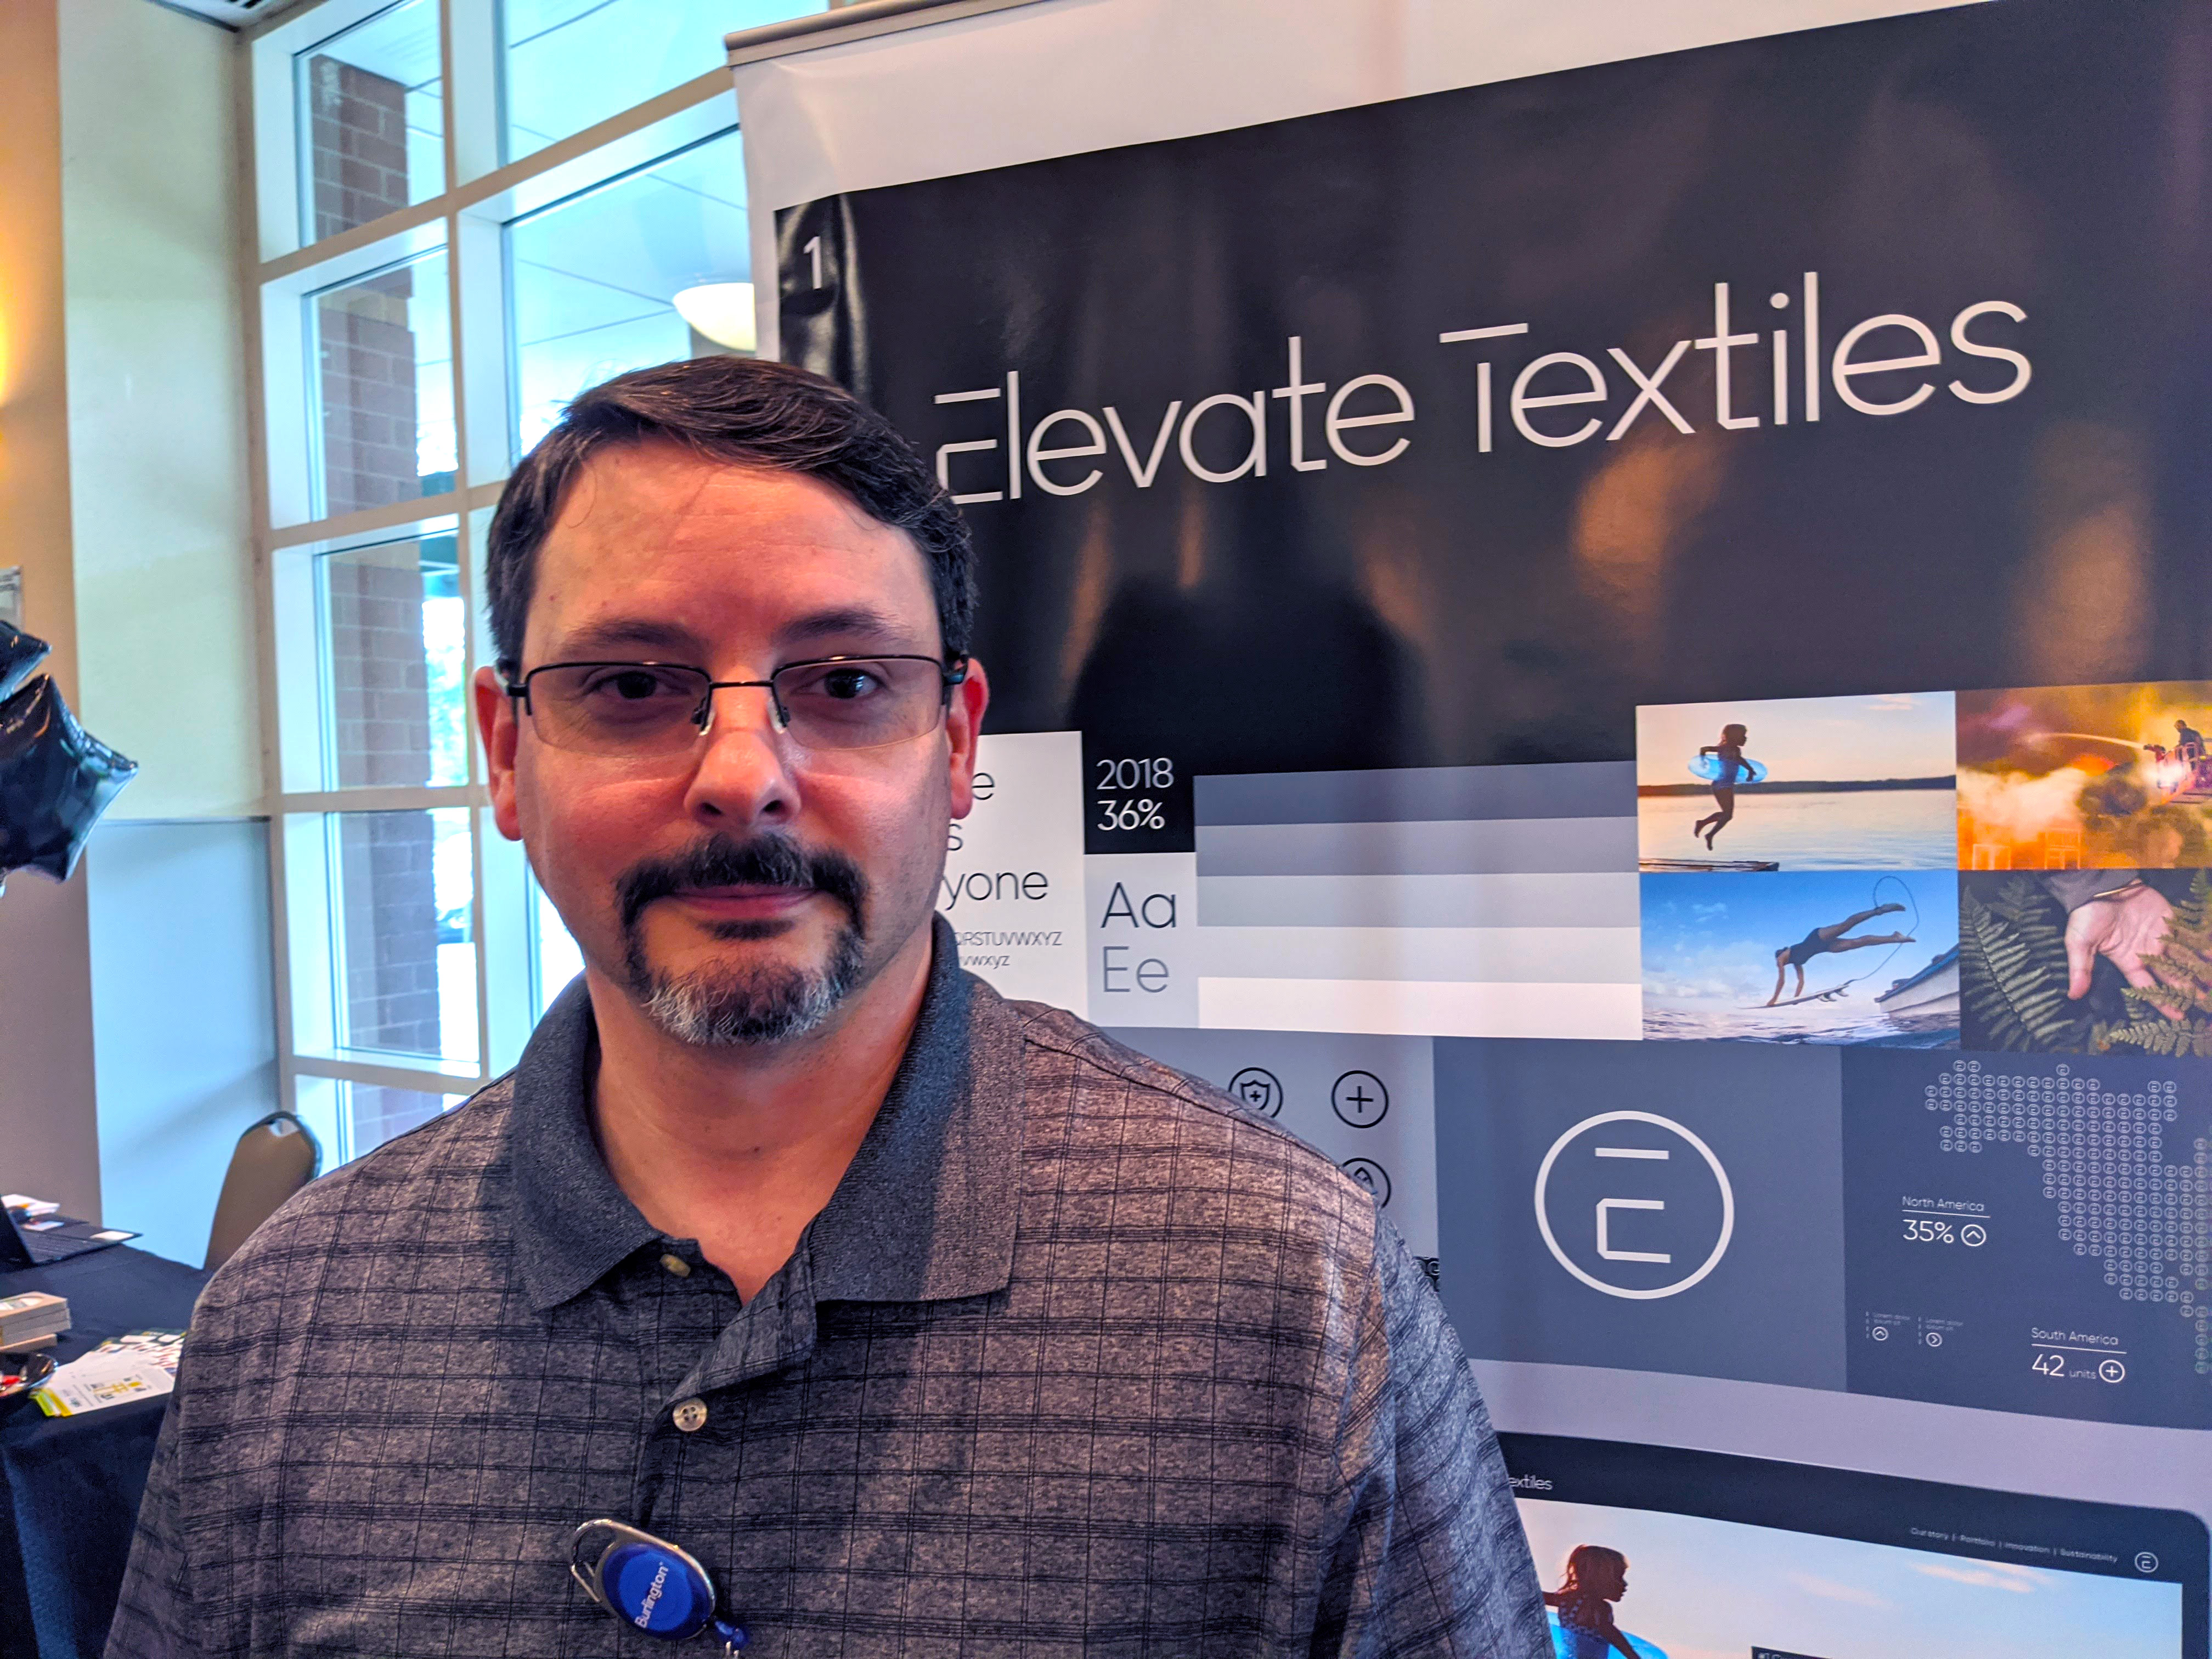 John Phillips stands in front of a banner for Elevate Textiles